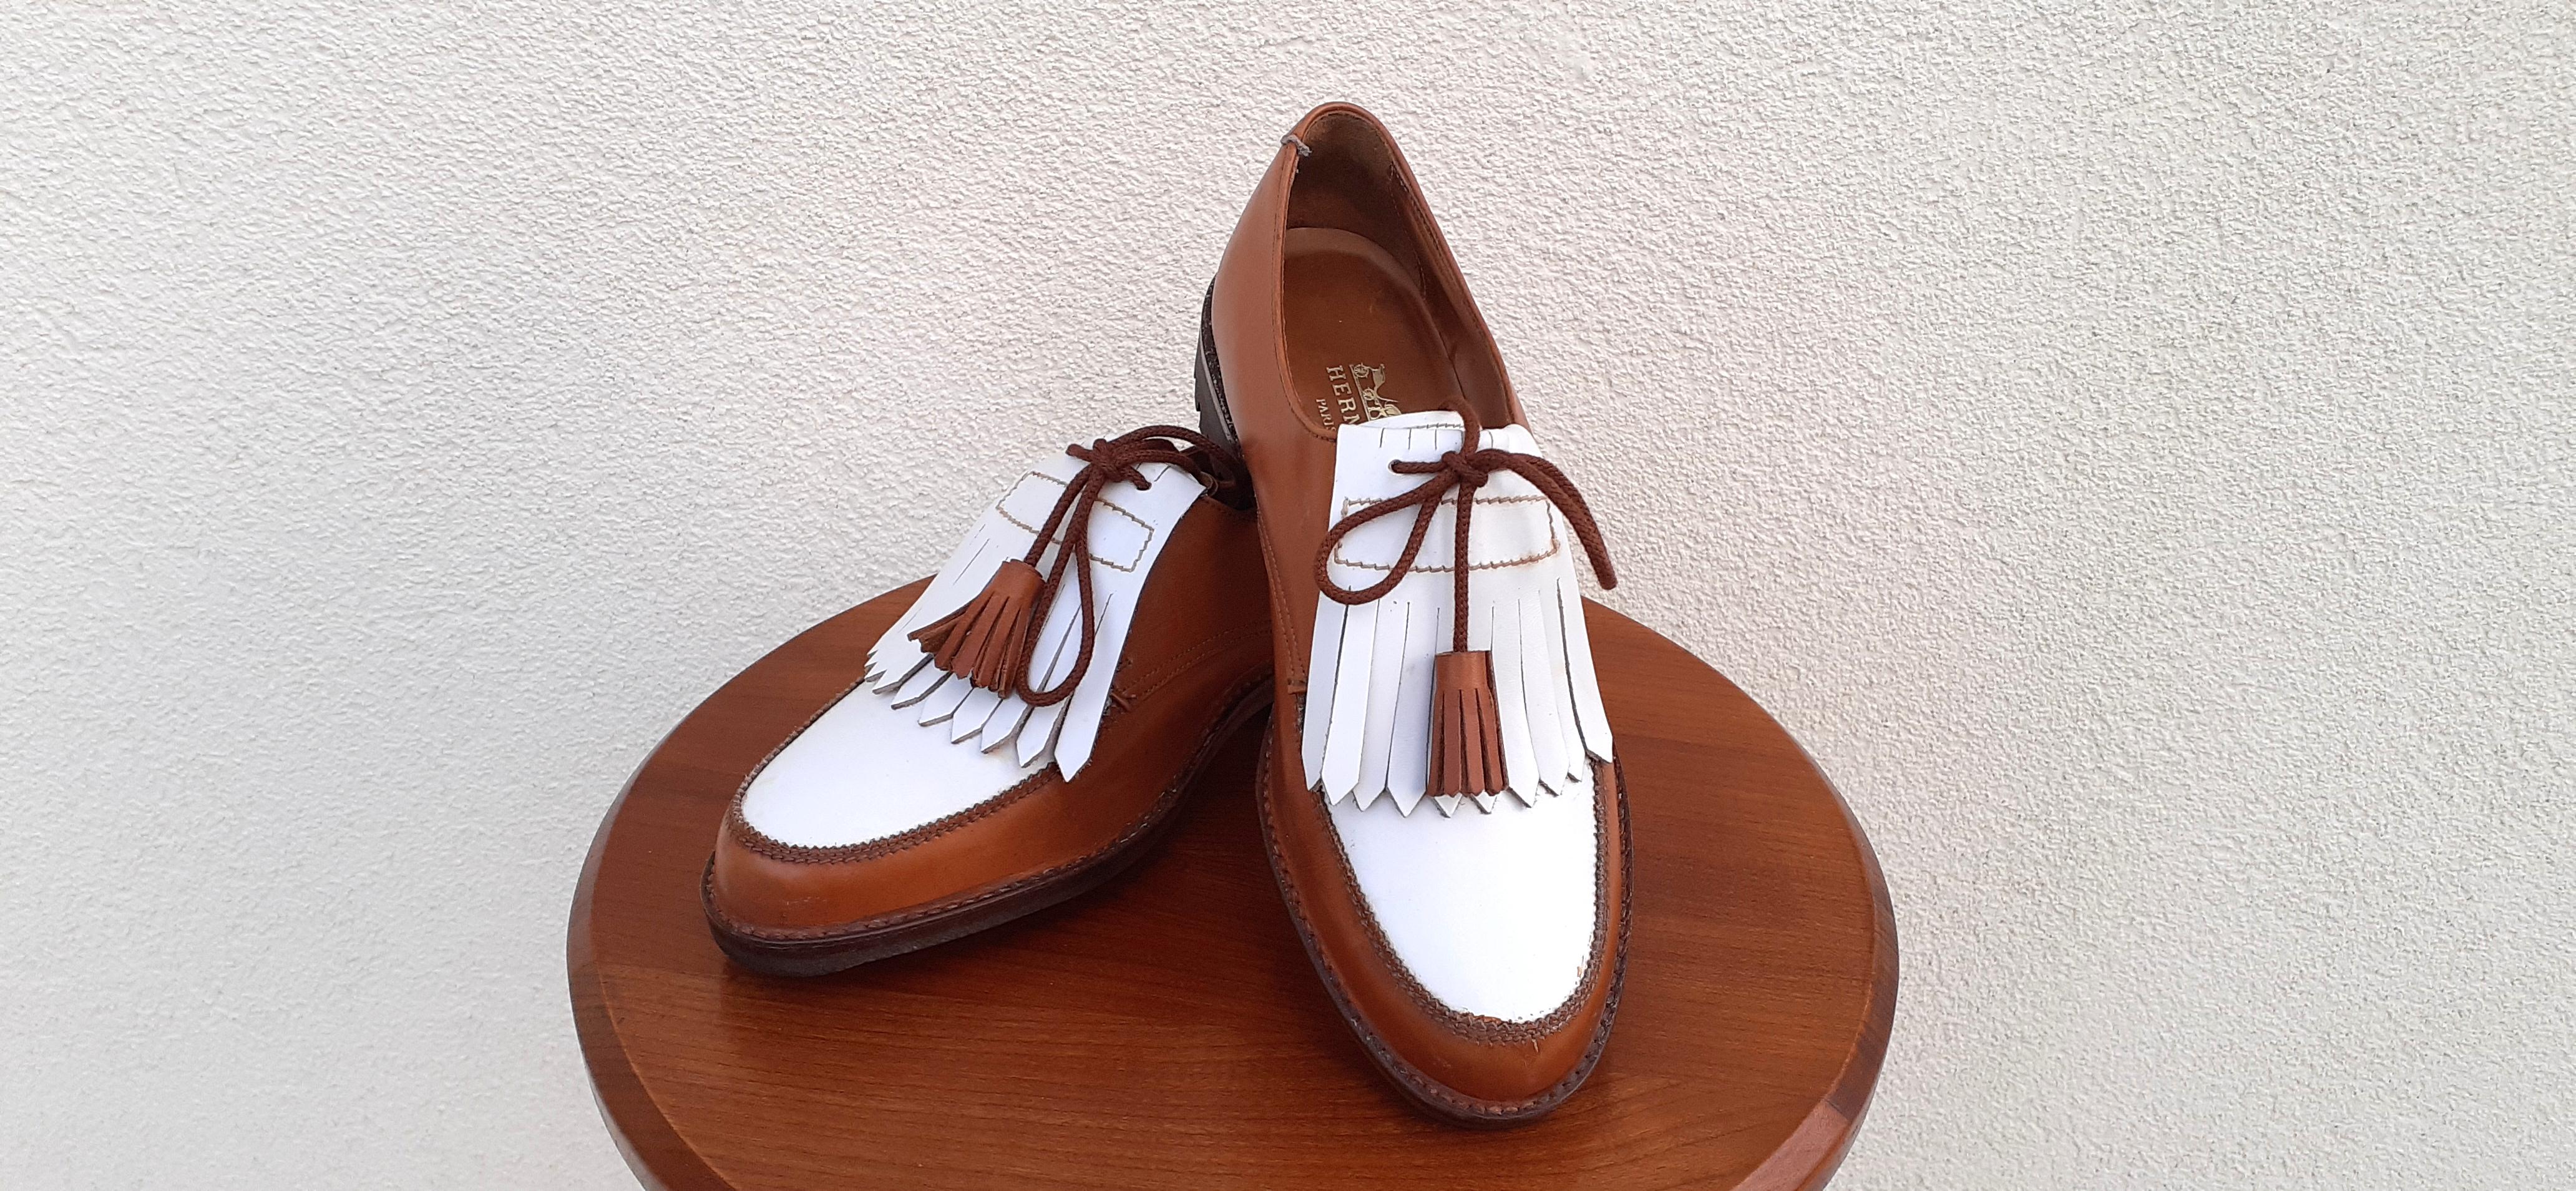 Ultra classy English style for these stunning authentic Hermès shoes

